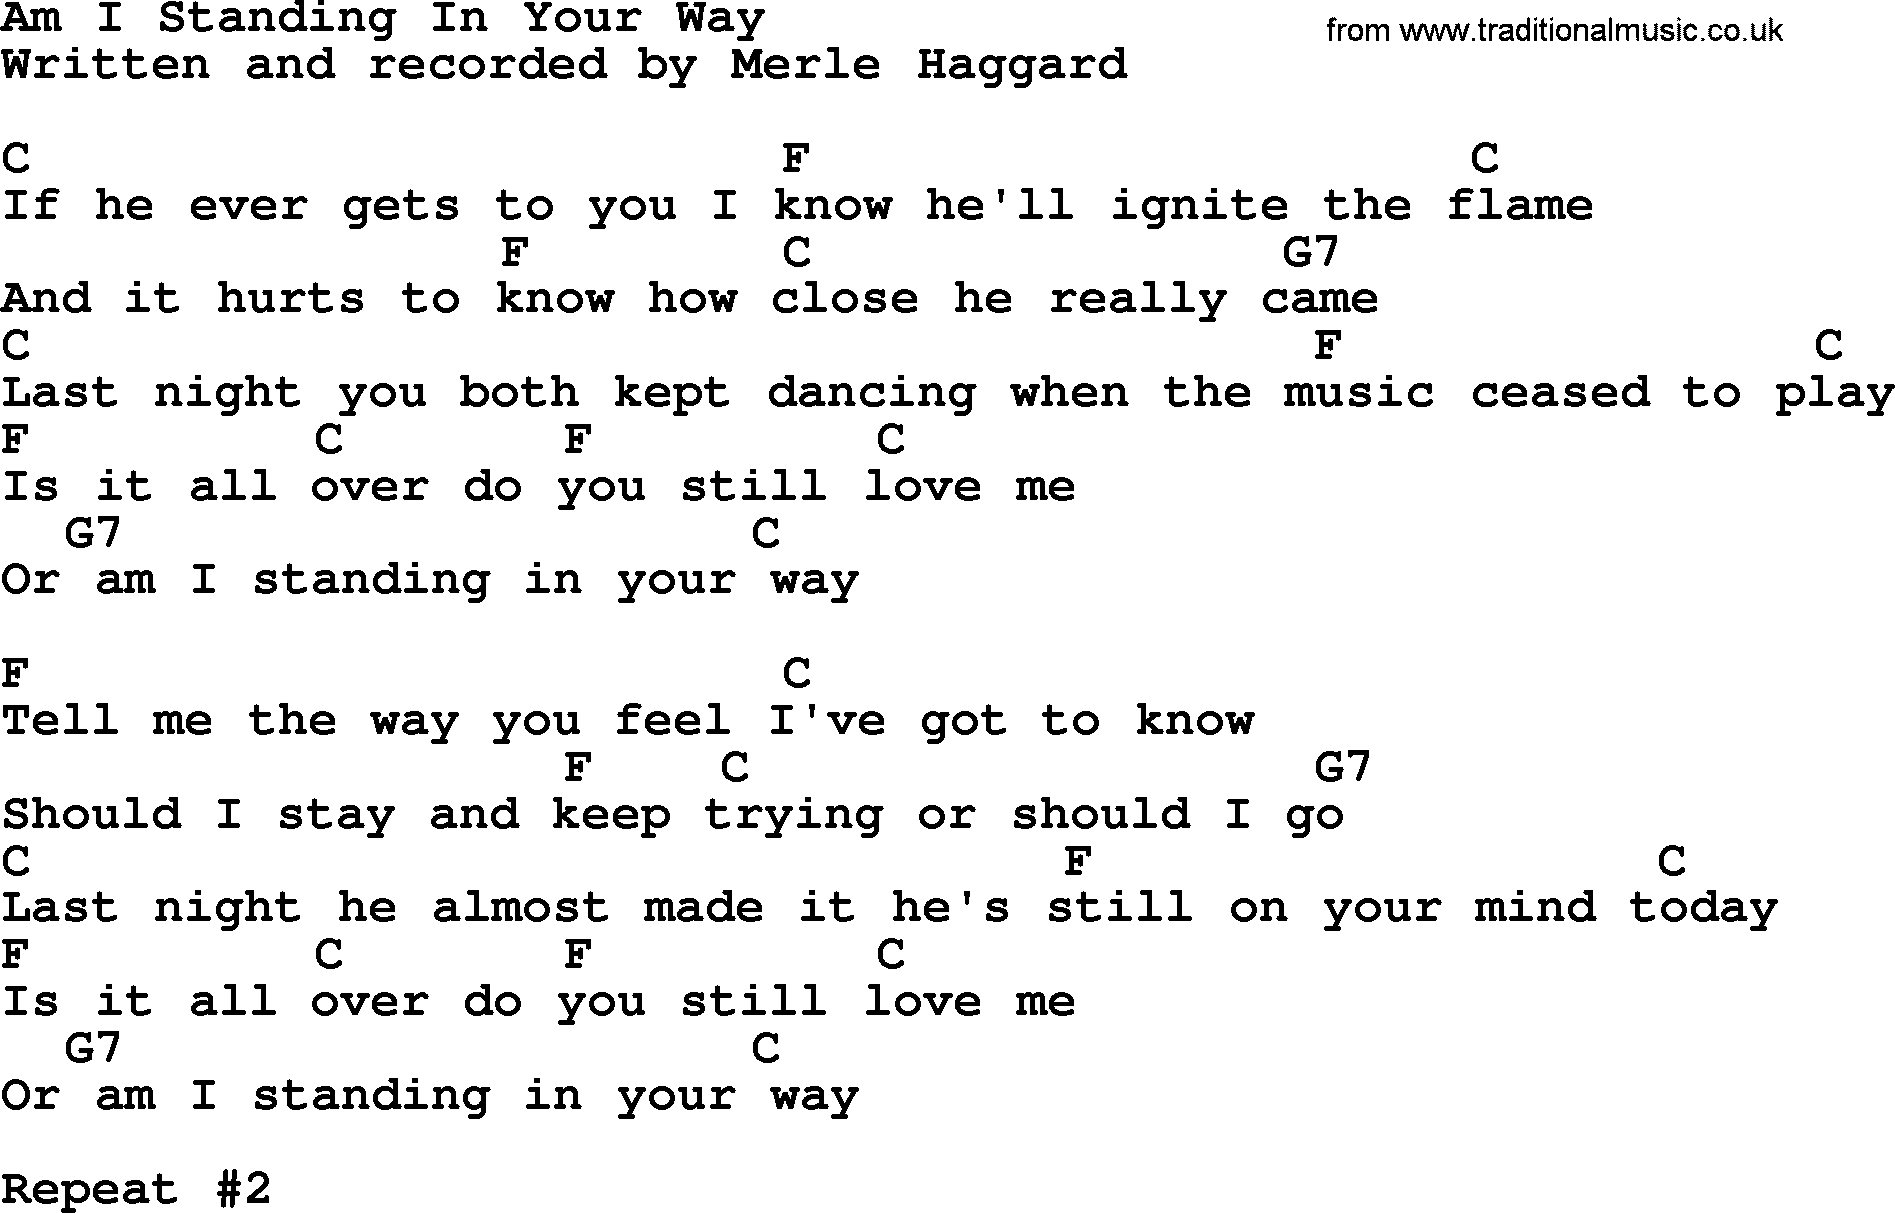 Merle Haggard song: Am I Standing In Your Way, lyrics and chords